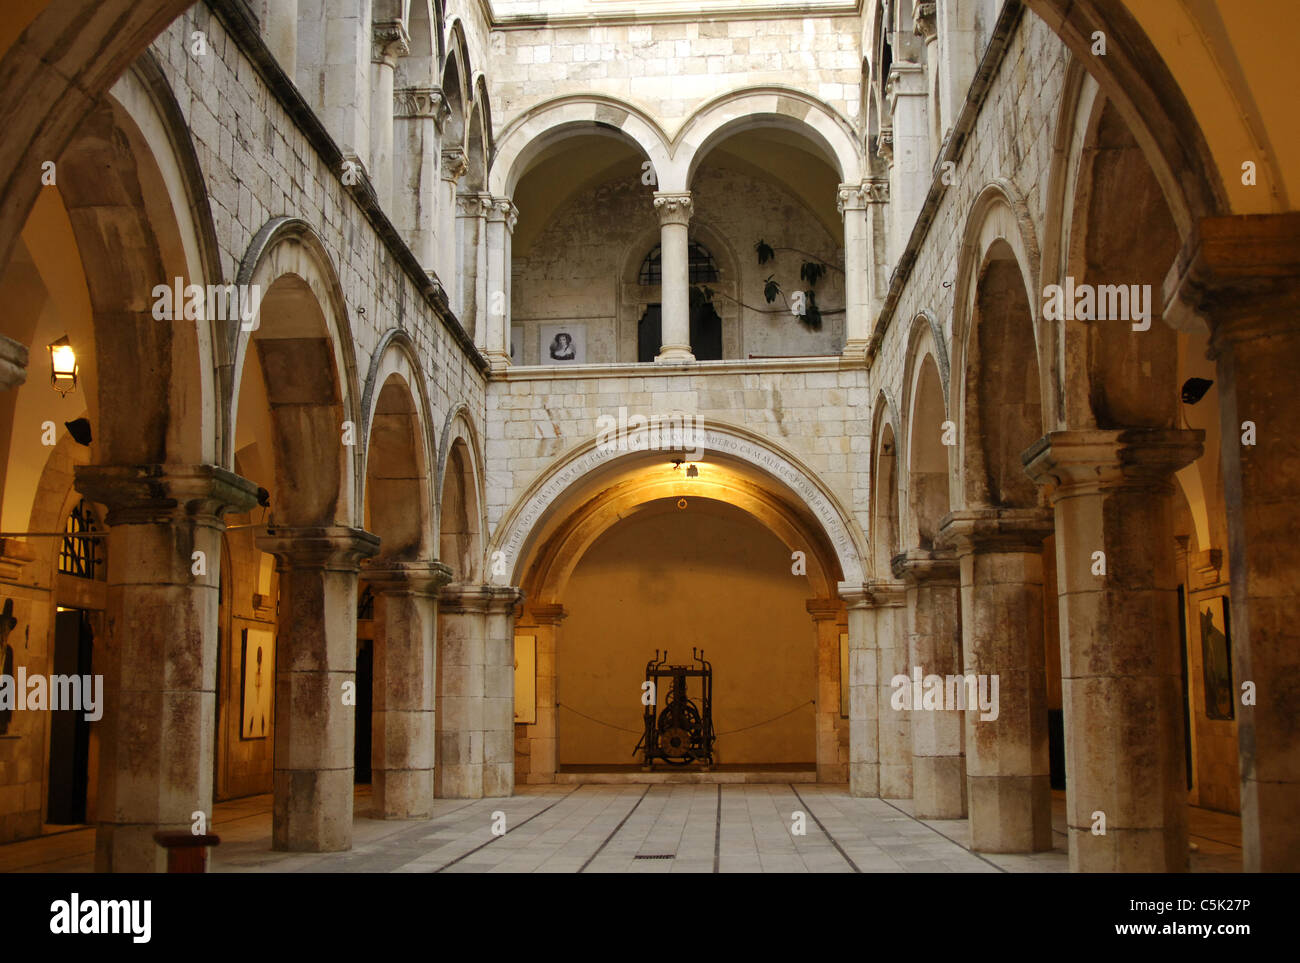 Croatia. Dubrovnik. Interior of the Cathedral of the Assumption of the Virgin Mary. Stock Photo